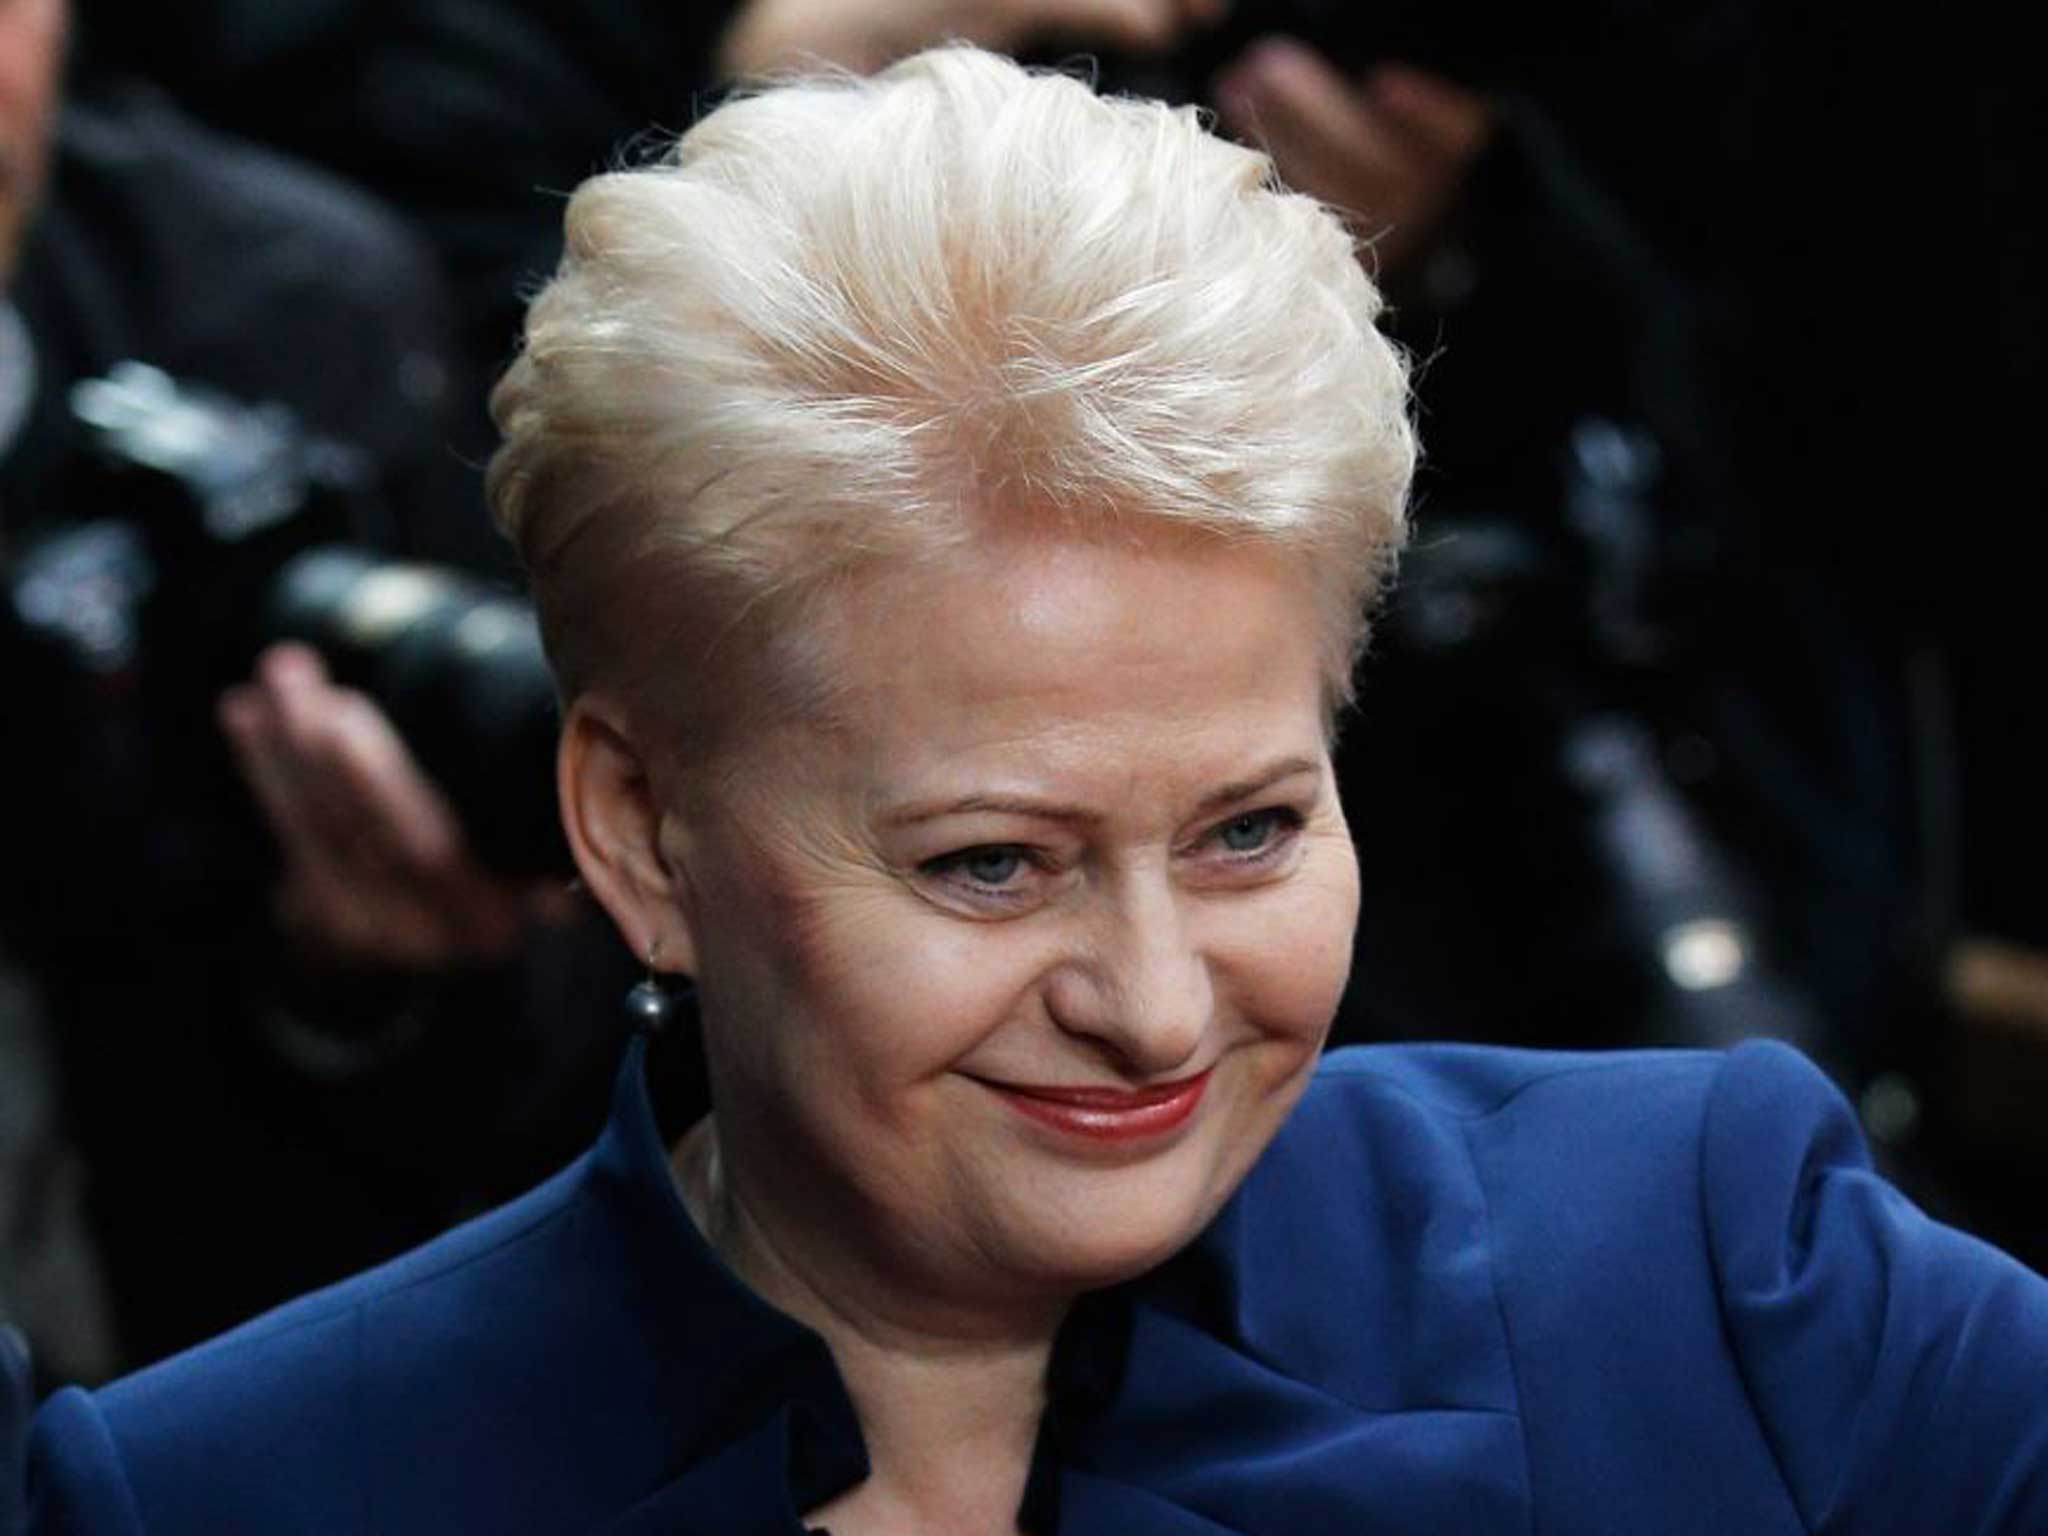 Dalia Grybauskaite warned that Lithuania needed “the same unity which got us liberty now” (Getty Images)